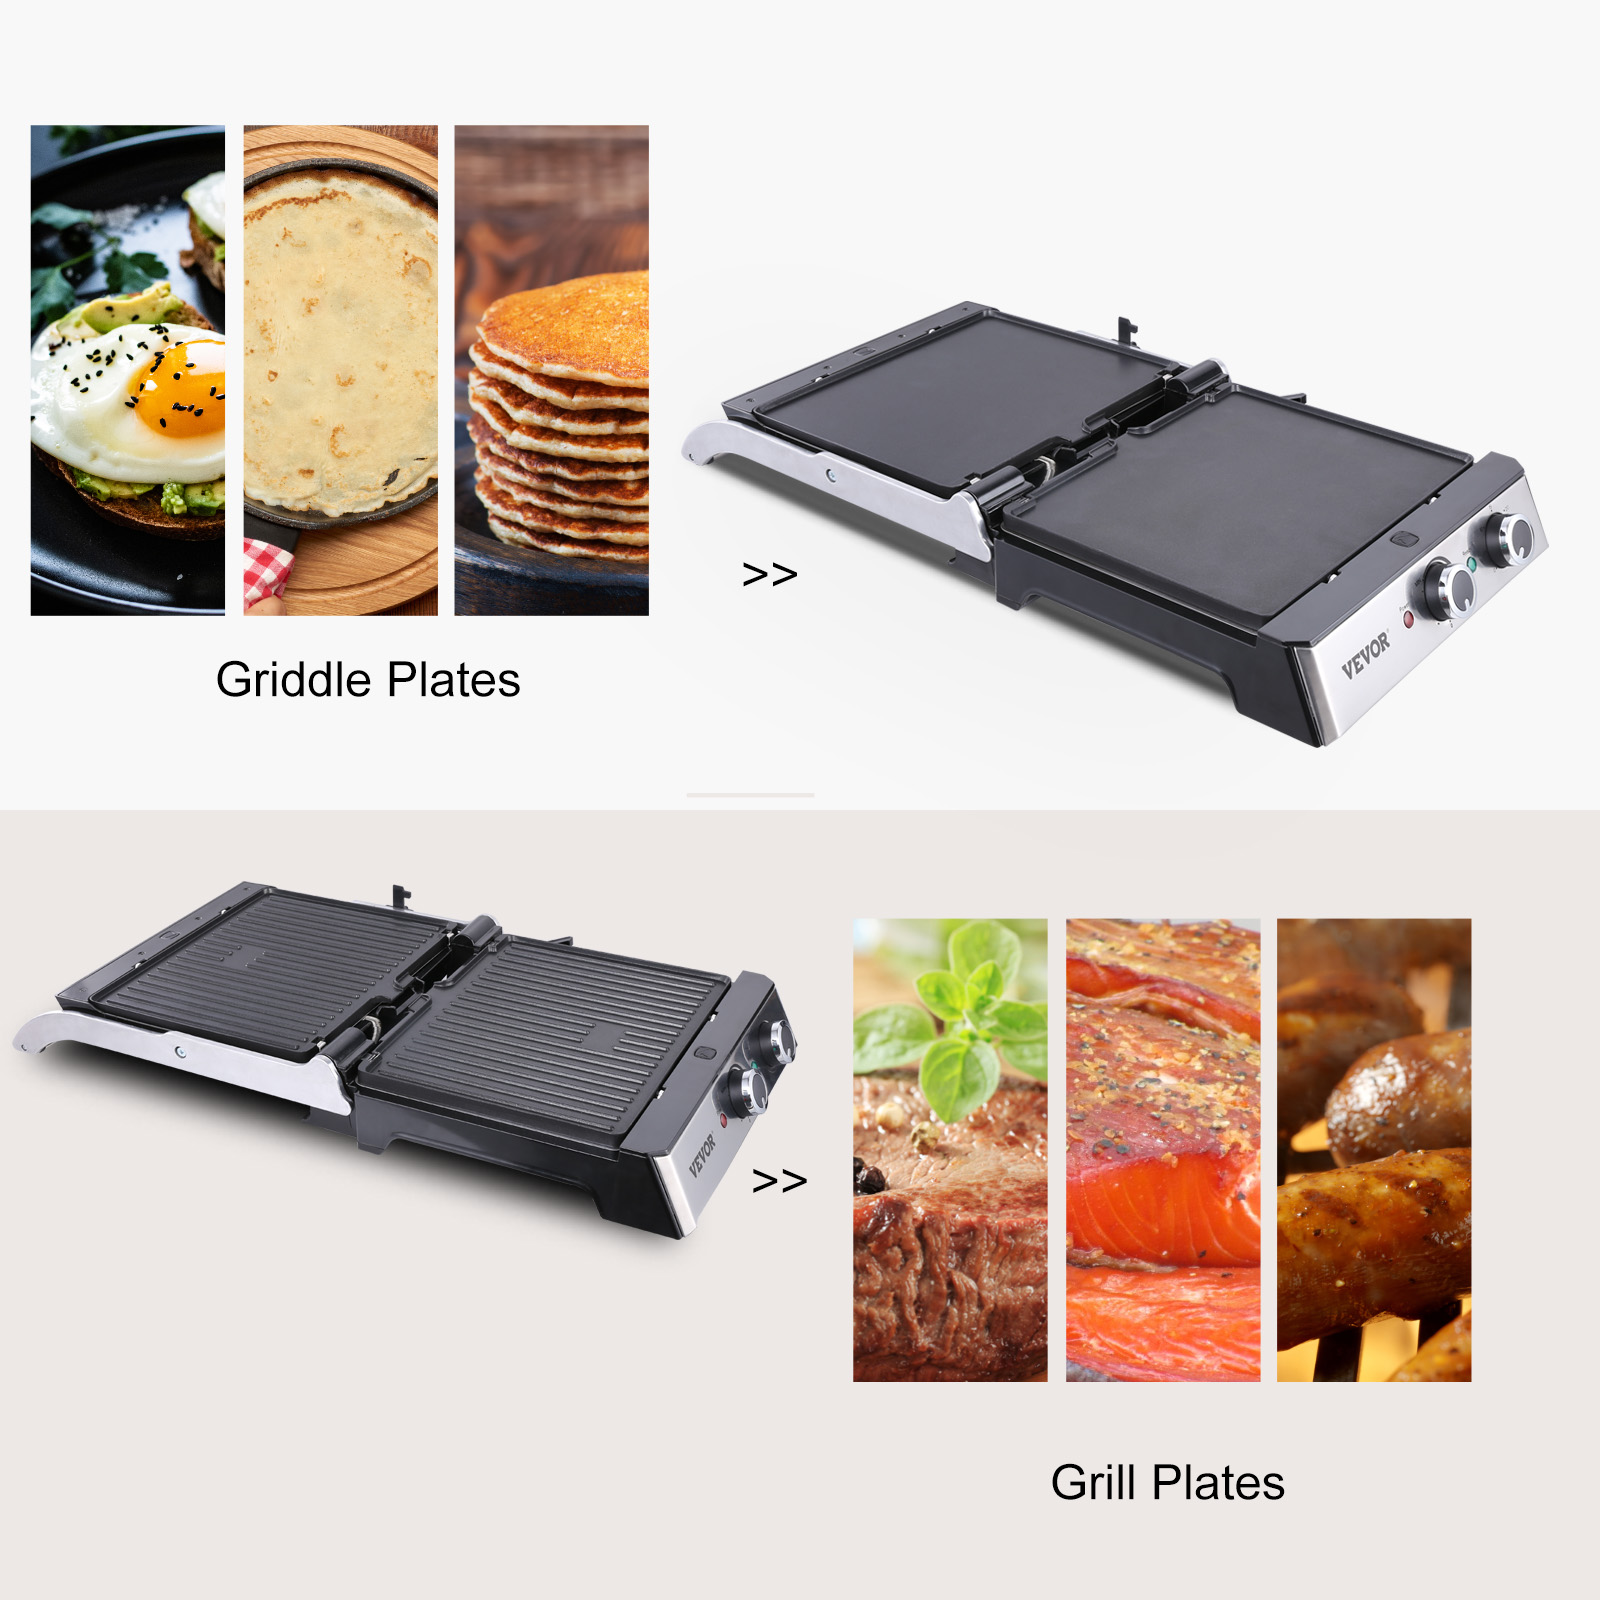 VEVOR 14.4 in. Commercial Electric Griddle 1800-Watt Indoor Countertop Grill,  0 - 230°C Stainless Steel Grill Sandwich Maker YBDBLDQPCDY13D7NZV1 - The  Home Depot